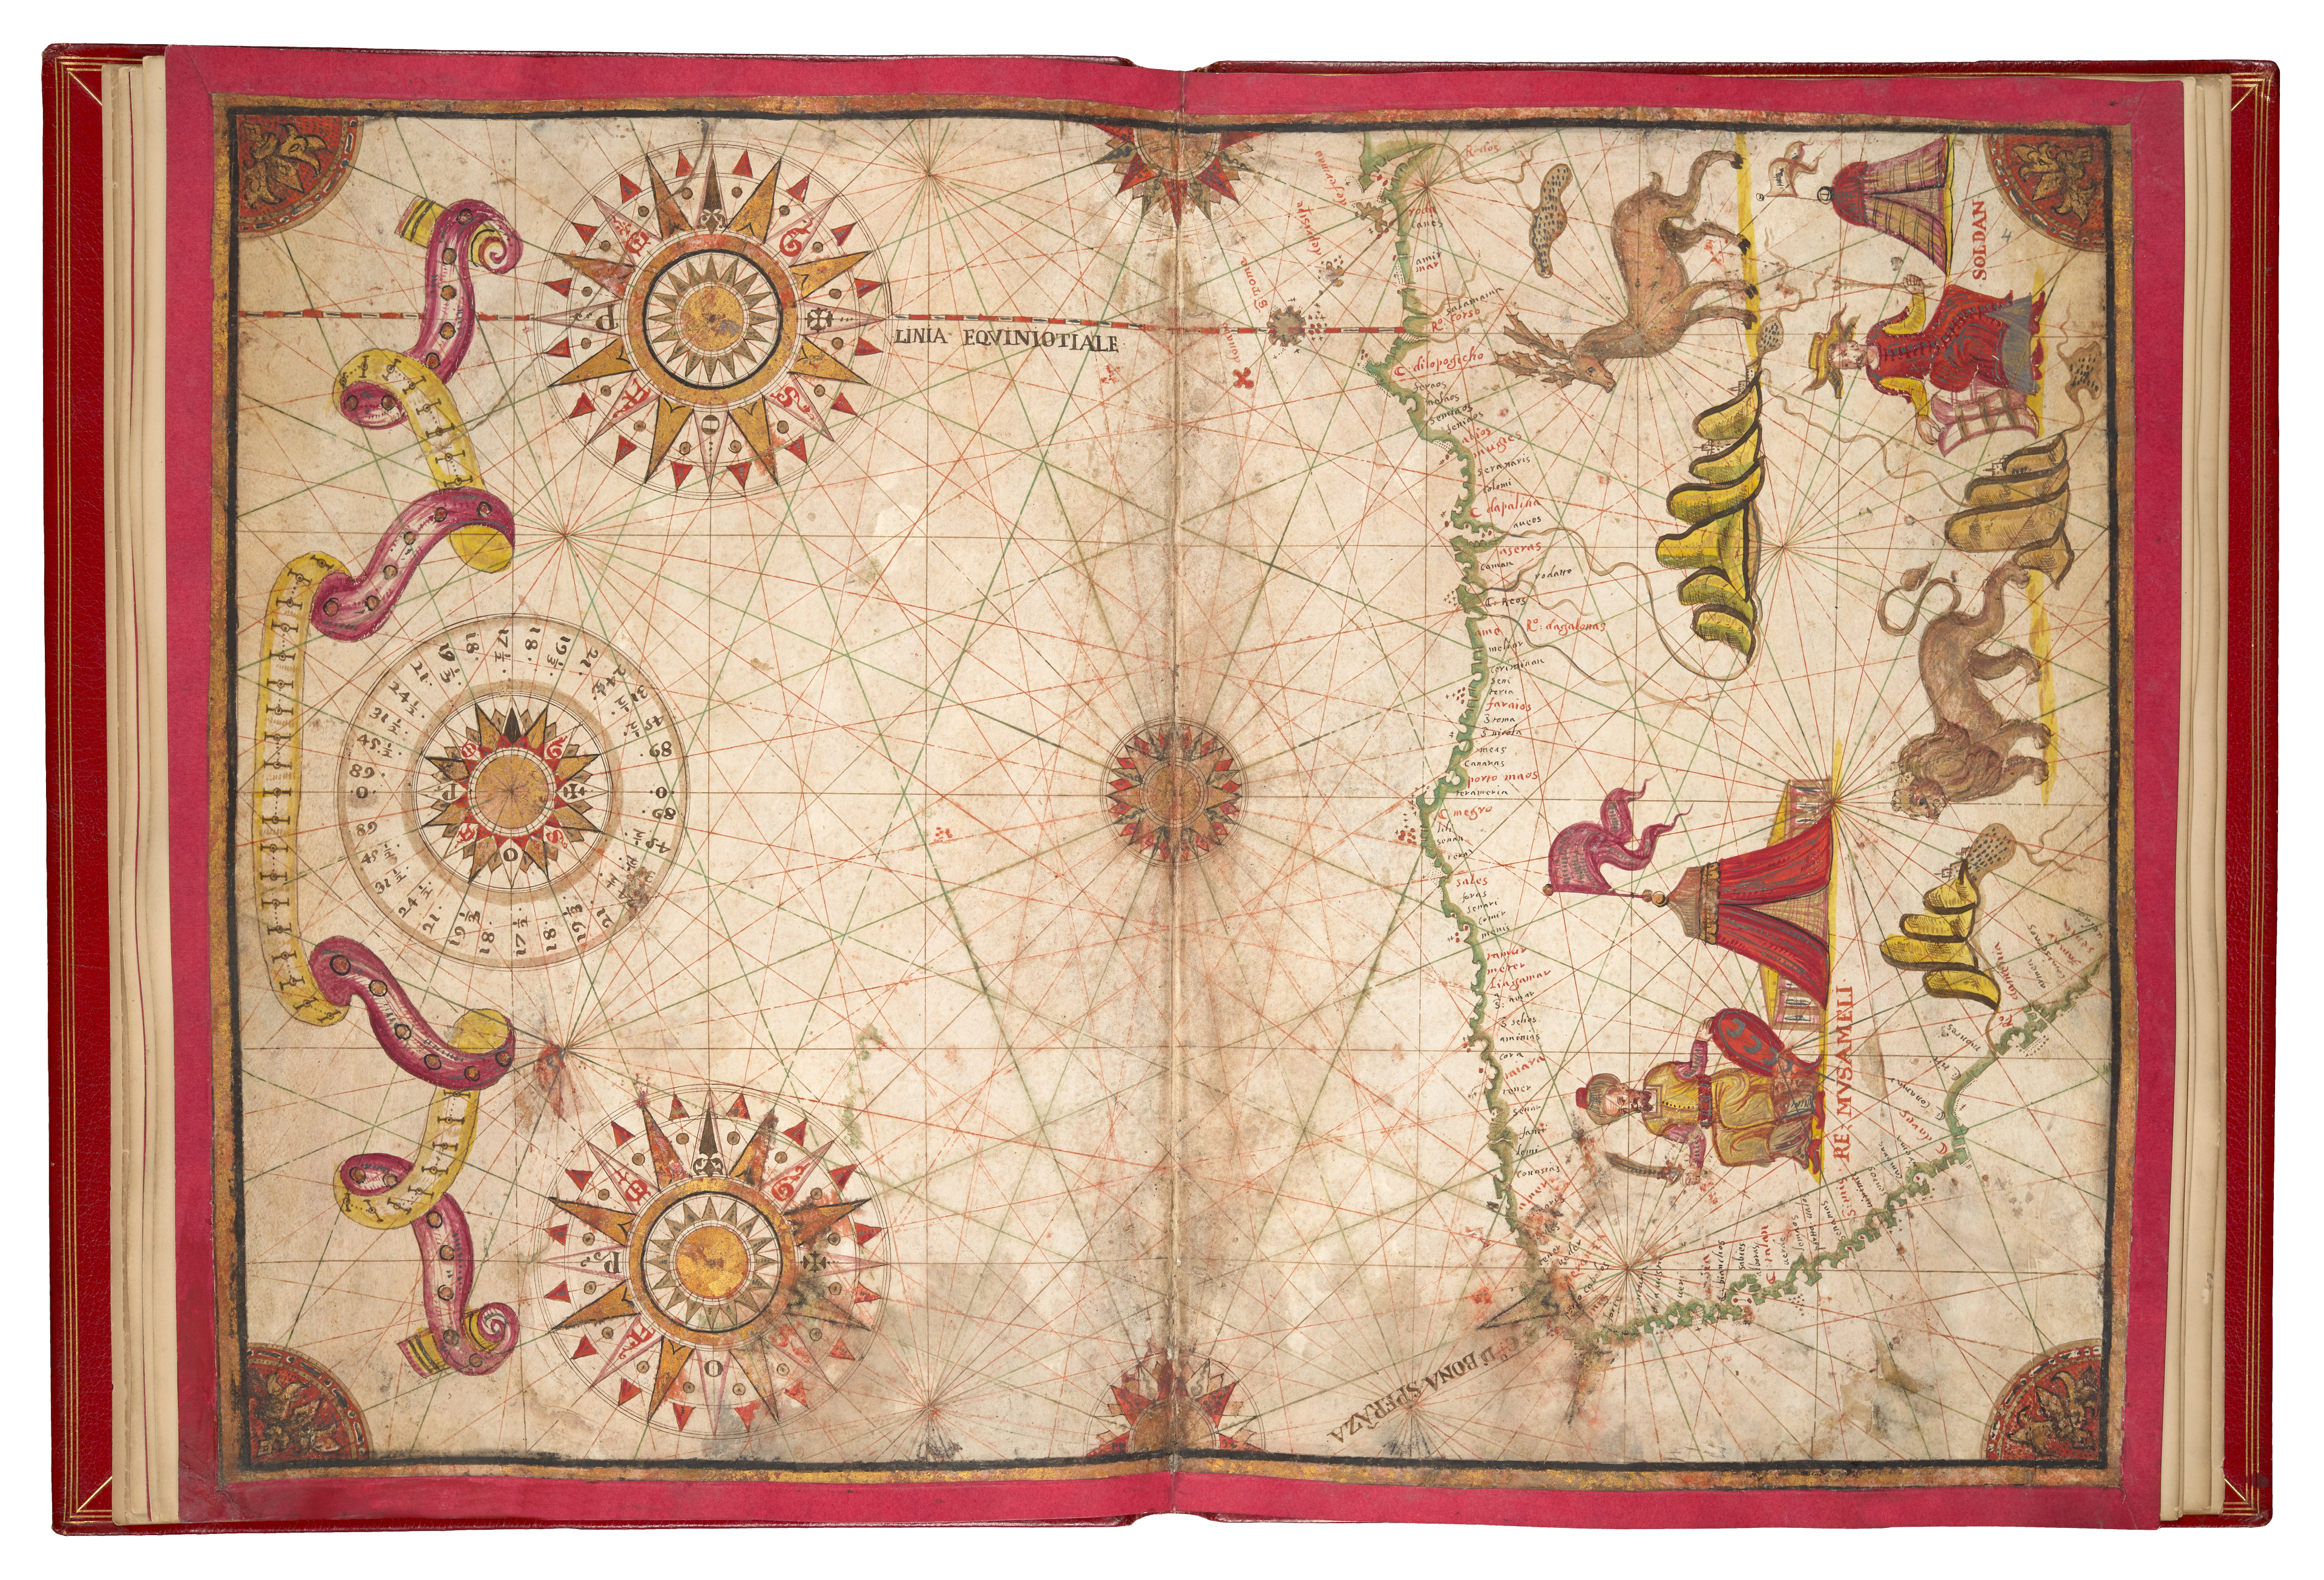 Preview of Cadamosto Portolan atlas, with stunning illustrations in reds and golds 